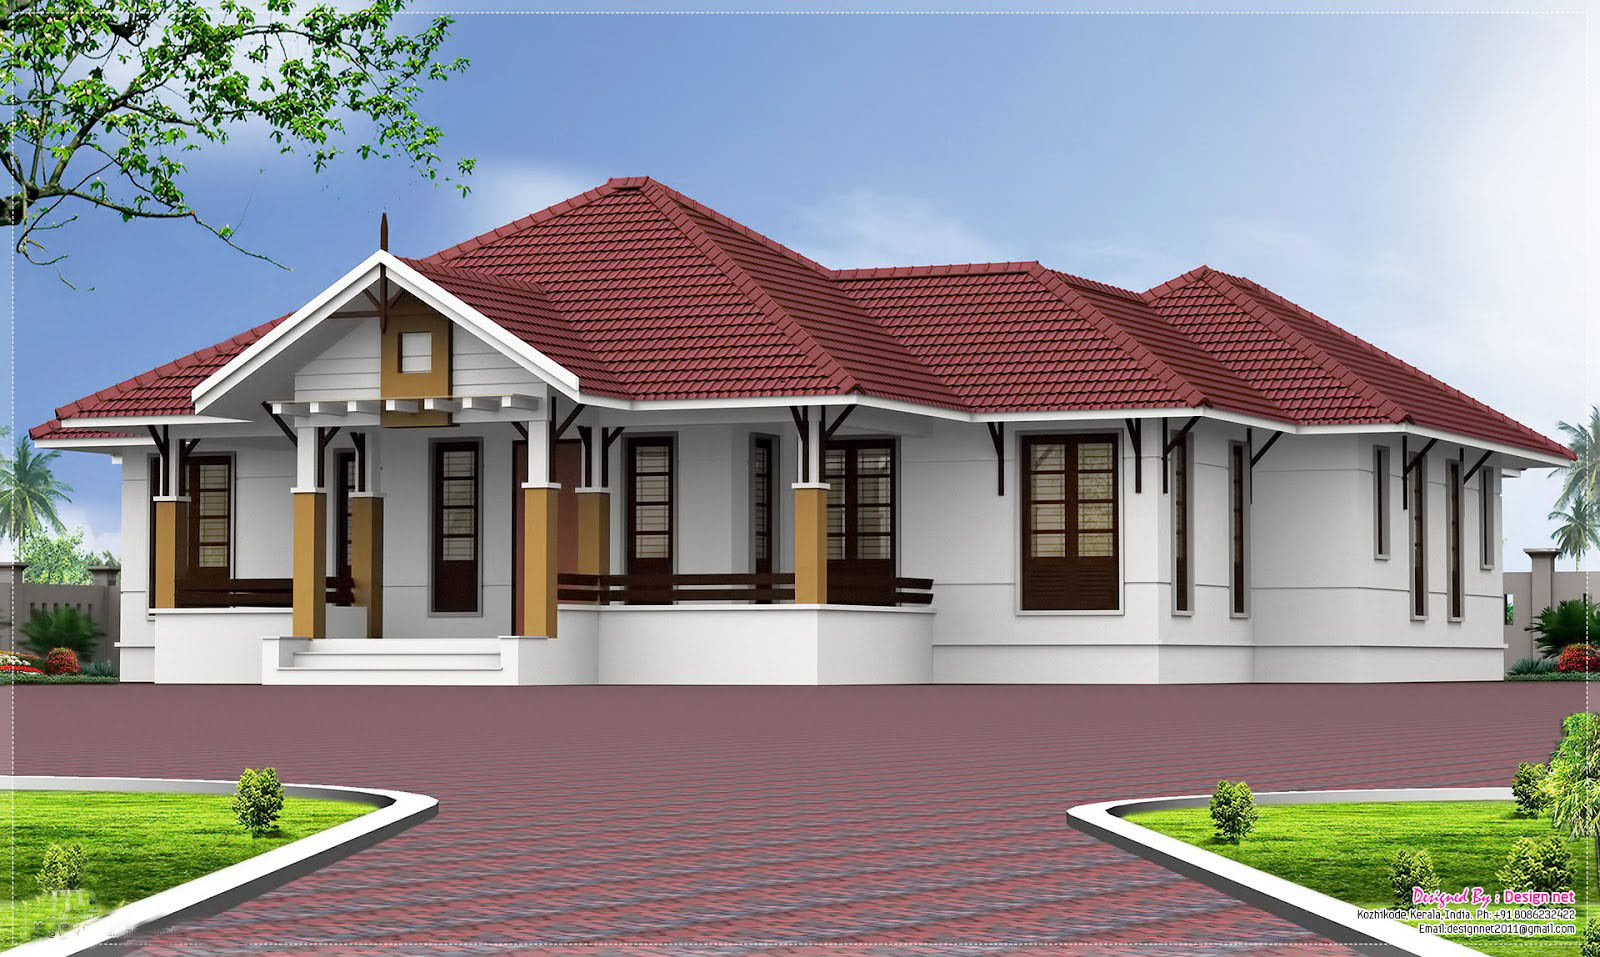 traditional style homes big house plans in south onal design net ideas  likable architectures inspiring view